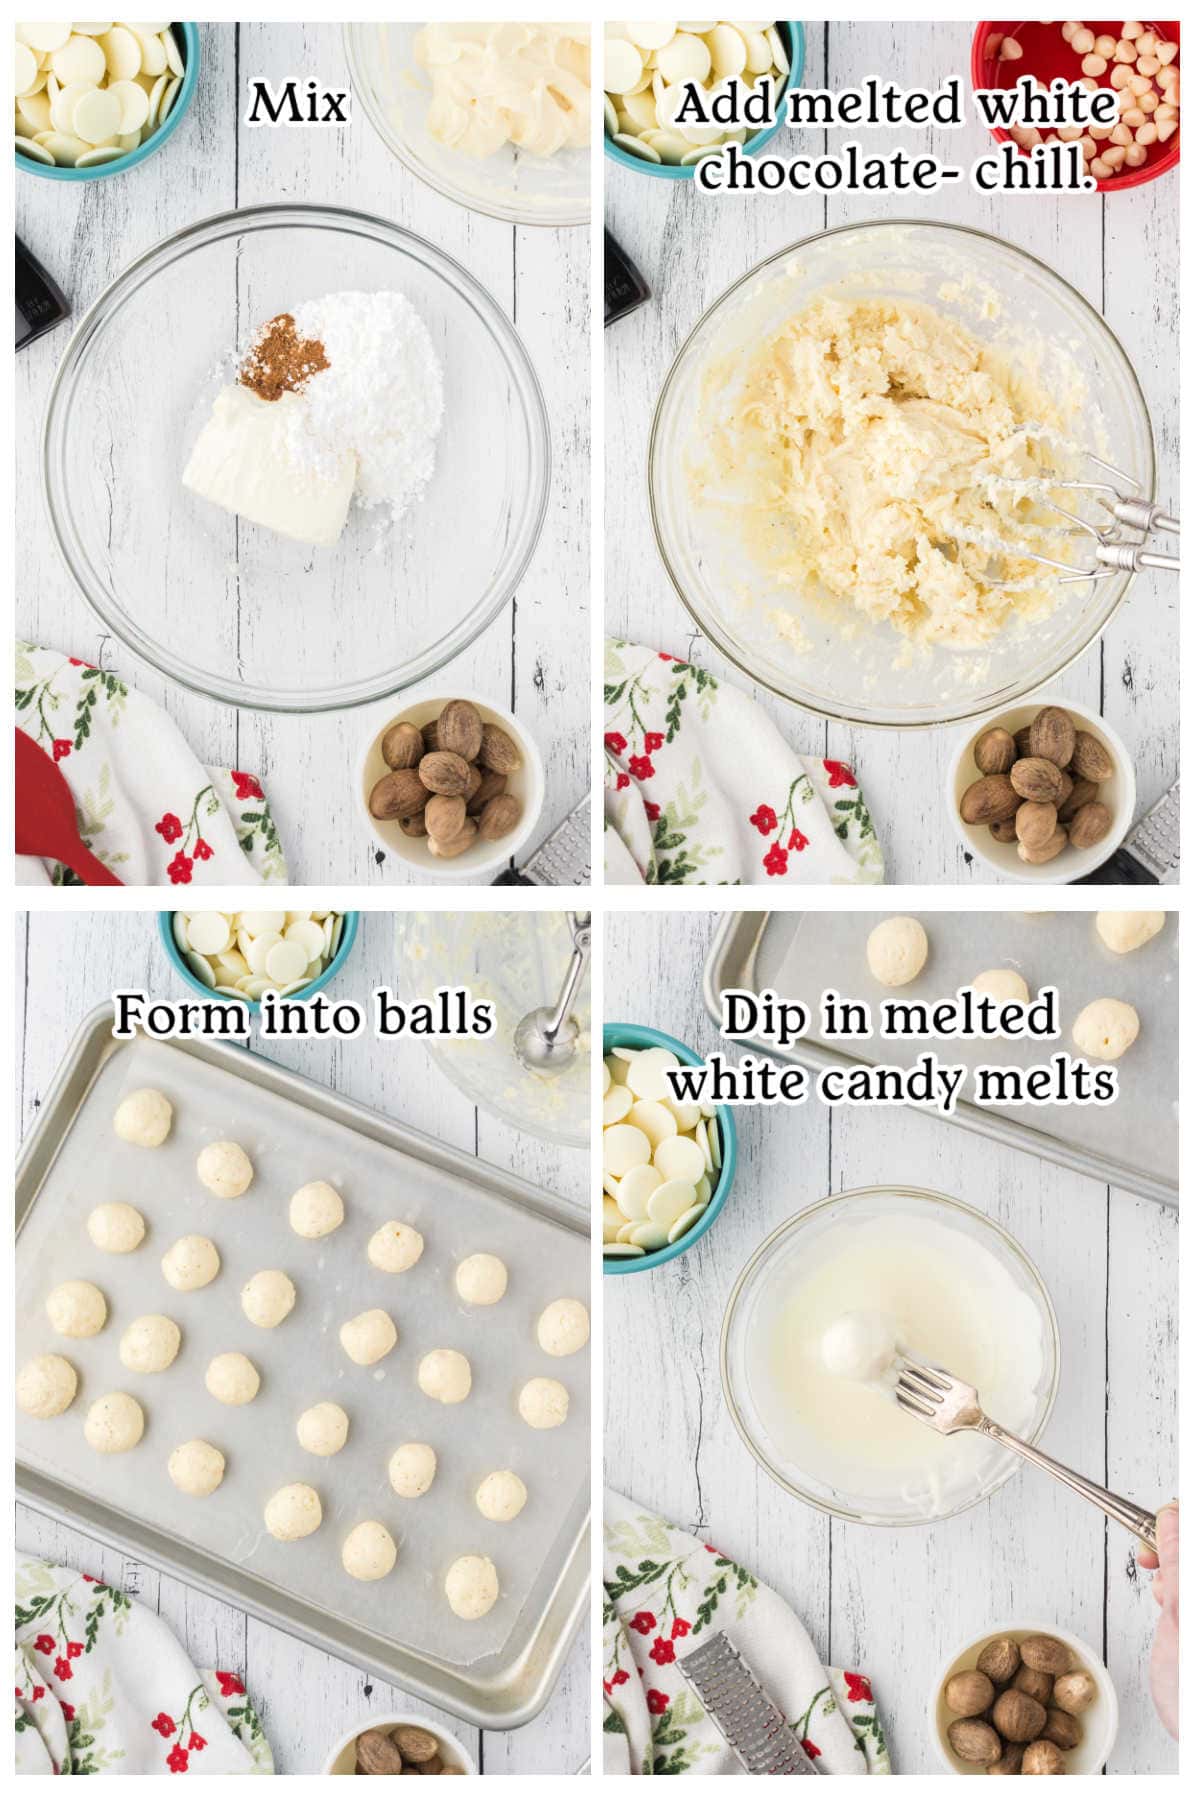 Four overhead images showing steps and ingredients to make eggnog truffles.